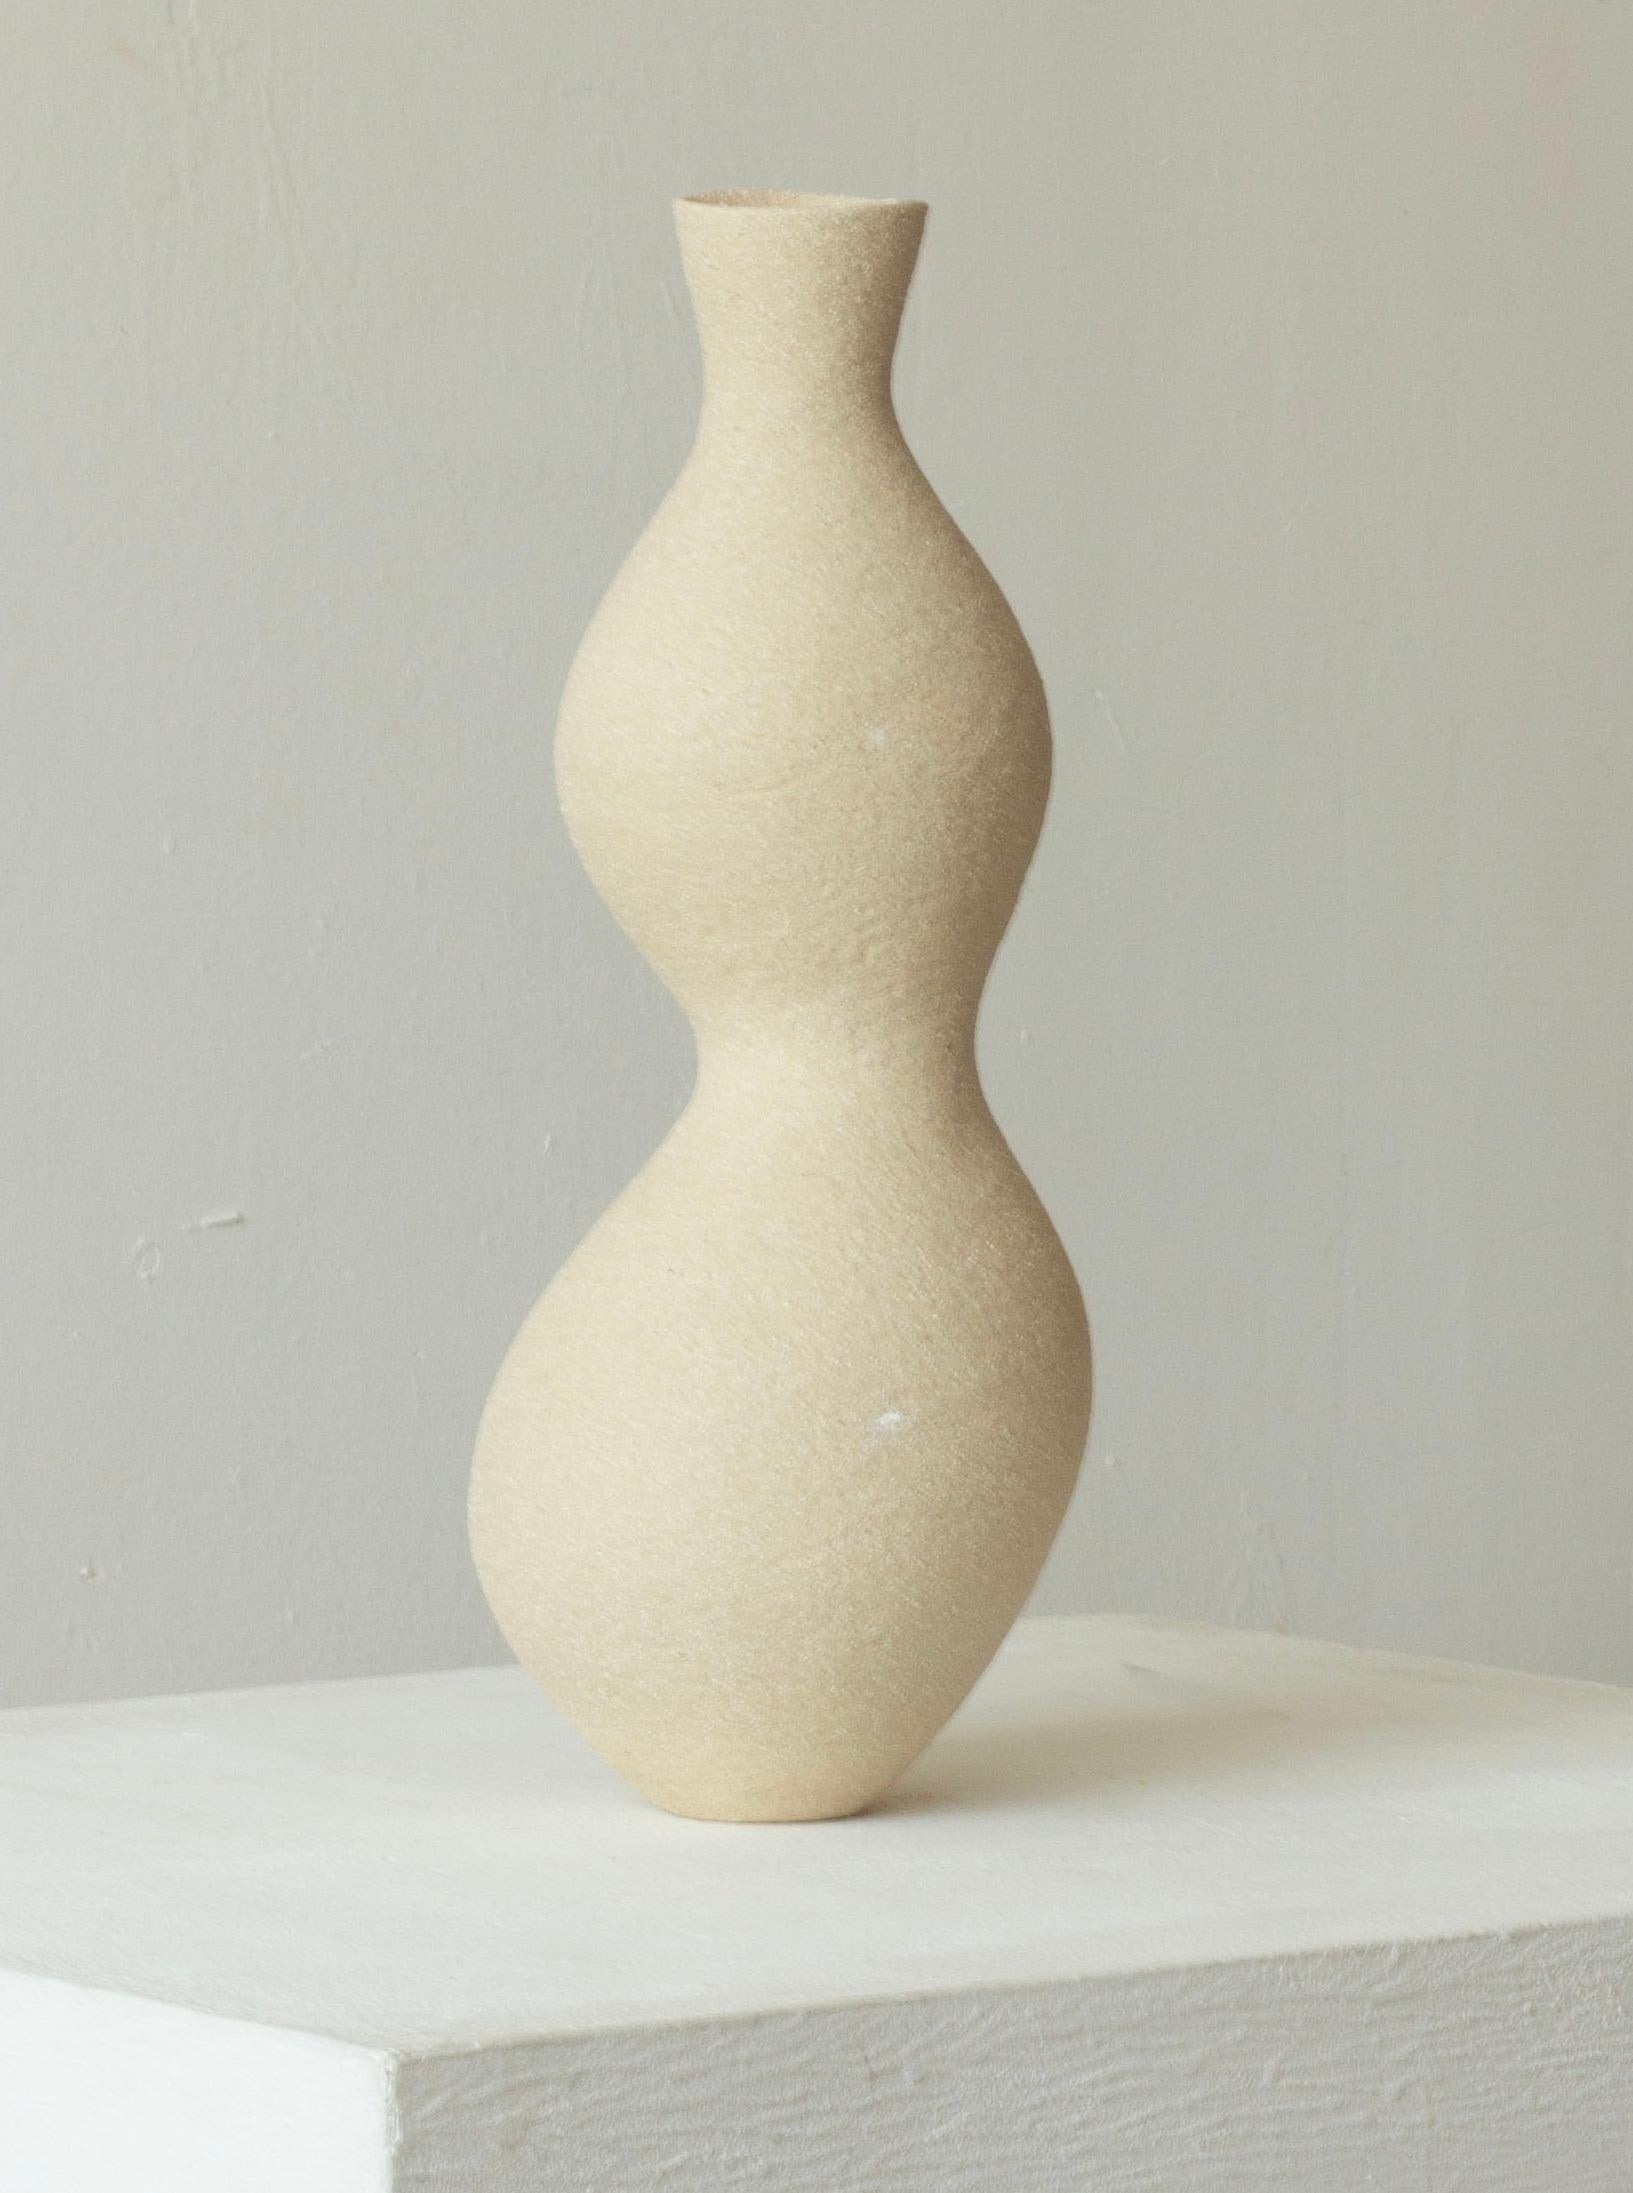 Woman 209 Vase by Karina Smagulova
One of a Kind.
Dimensions: Ø 11 x H 31 cm.
Materials: White stoneware.
​
With an Armenian and Kazakhstan heritage, Karina Smagulova was born in Greece in 1995 and graduated with a diploma in Architecture from